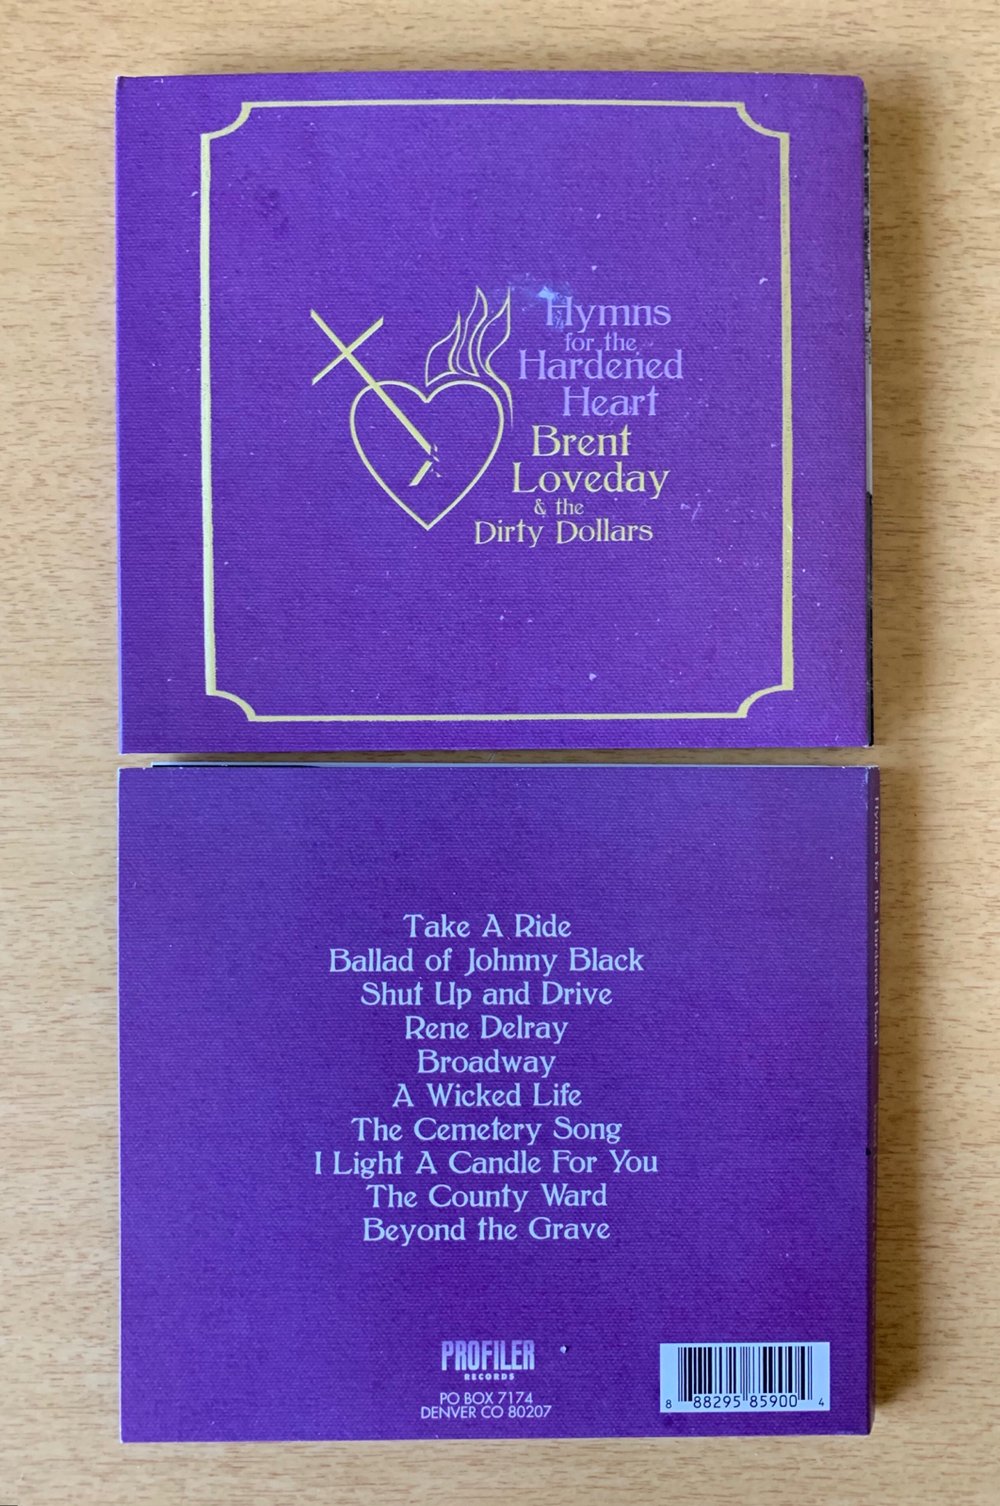 Hymns for the Hardened Heart CD